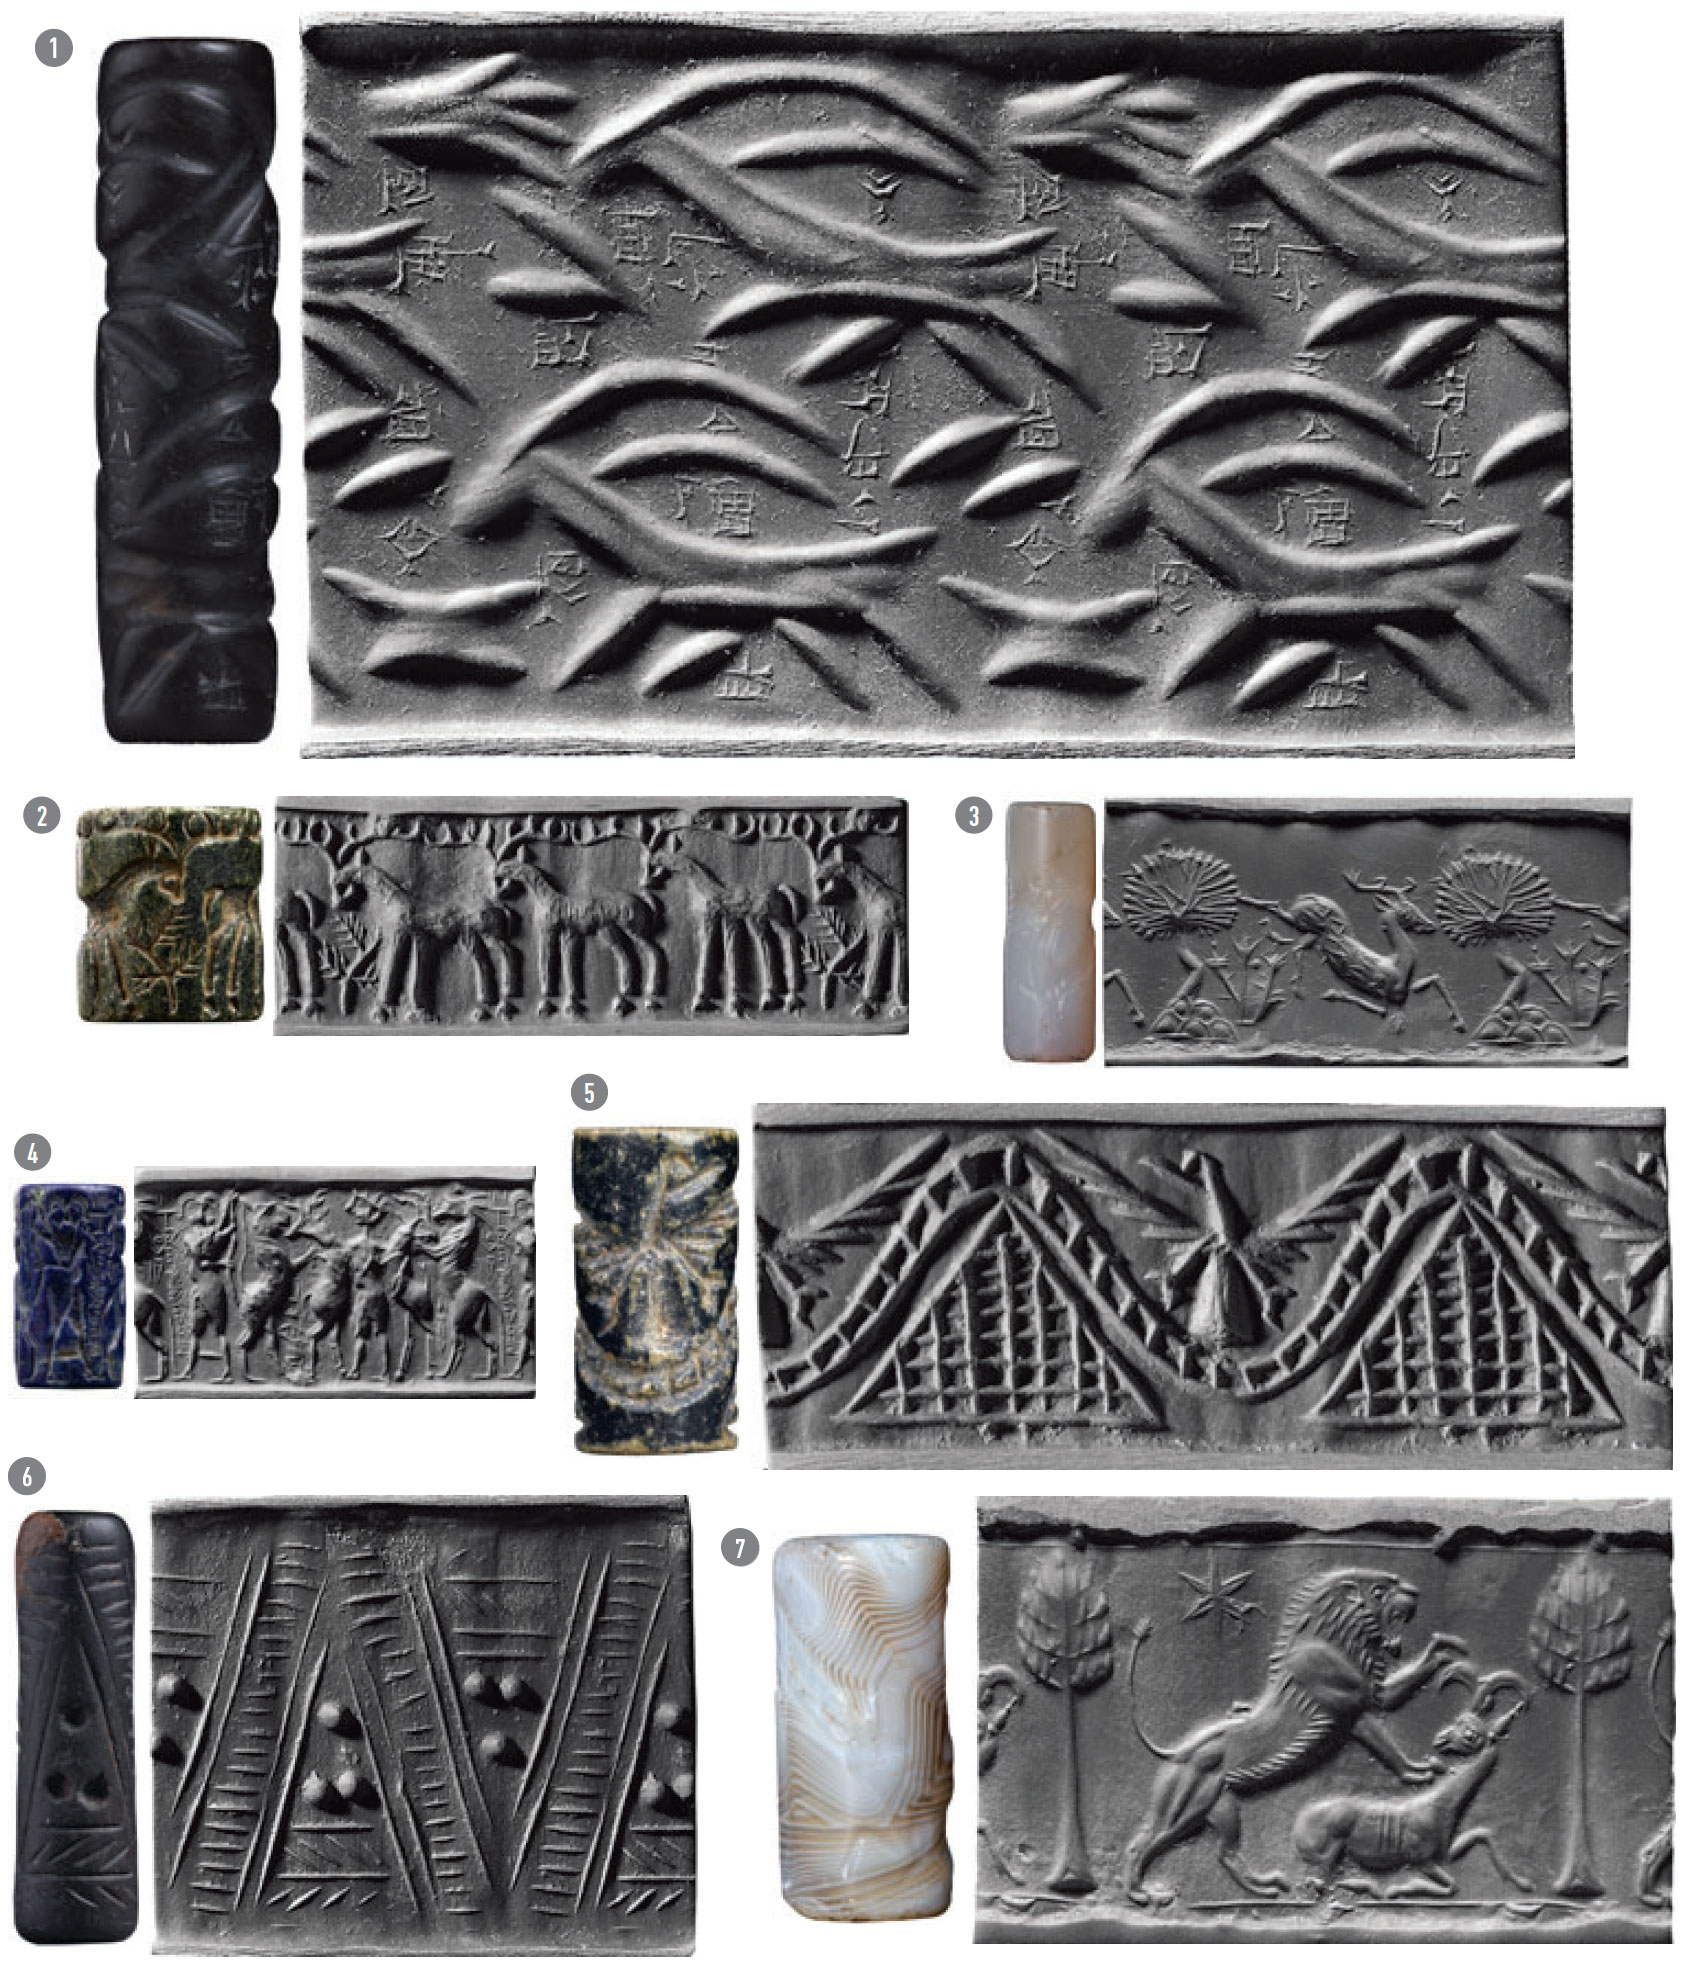 Cylinder seal finds from Mespotamia